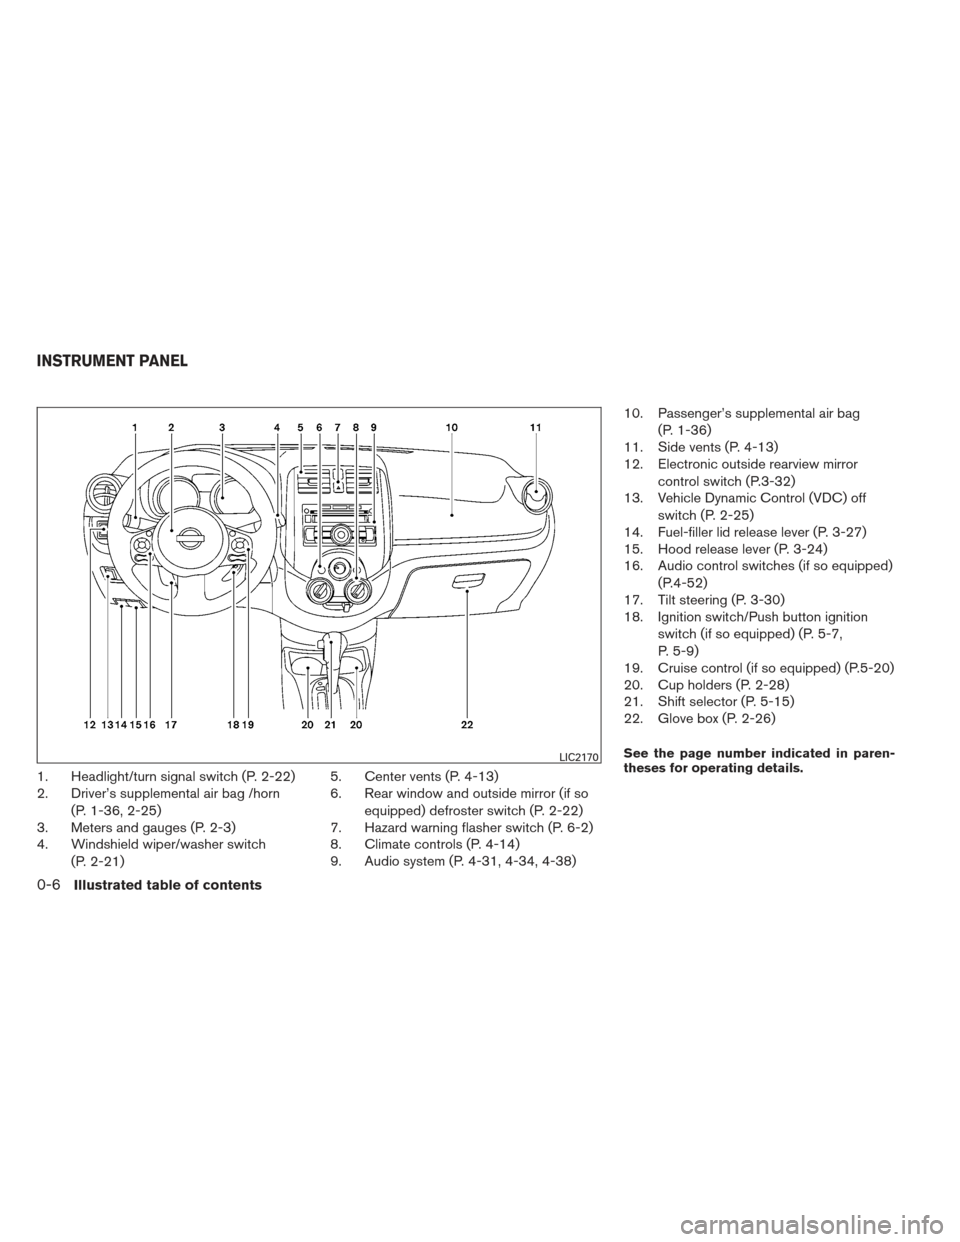 NISSAN VERSA SEDAN 2013 2.G User Guide 1. Headlight/turn signal switch (P. 2-22)
2. Driver’s supplemental air bag /horn(P. 1-36, 2-25)
3. Meters and gauges (P. 2-3)
4. Windshield wiper/washer switch
(P. 2-21) 5. Center vents (P. 4-13)
6.